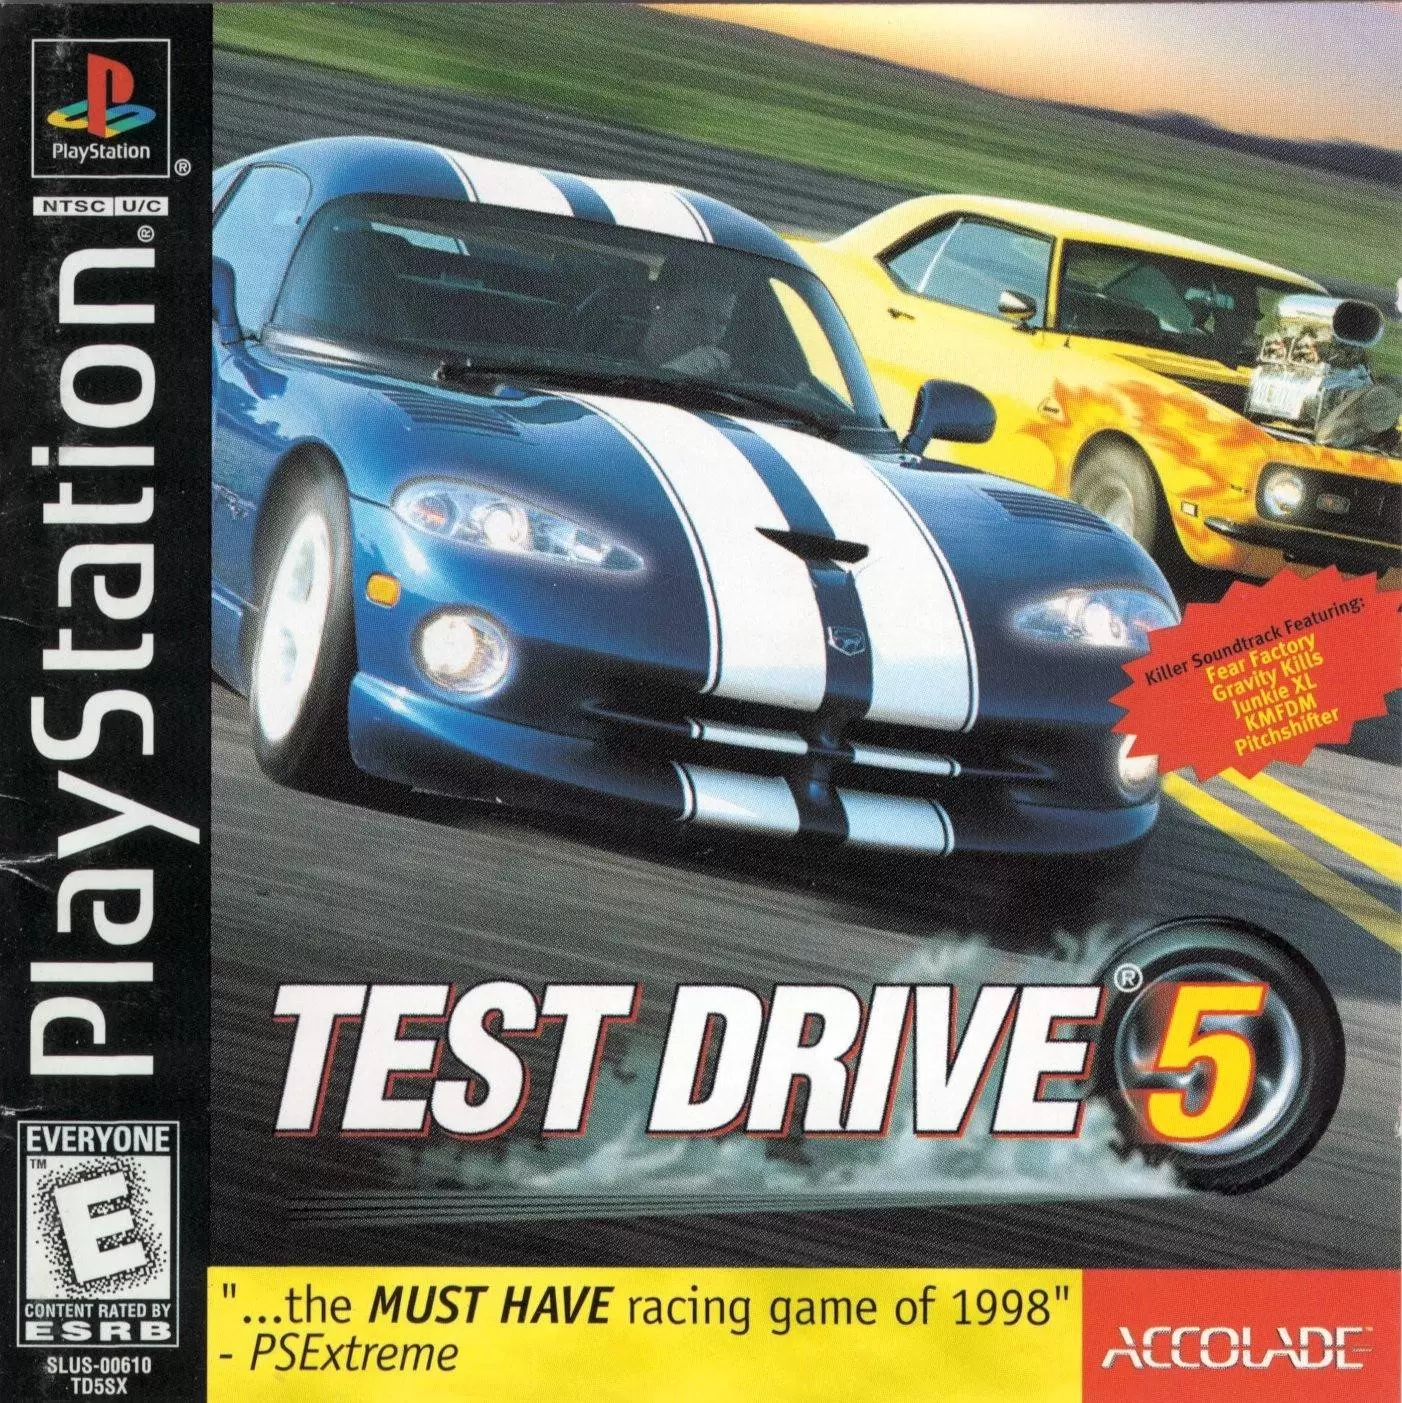 Playstation games - Test Drive 5